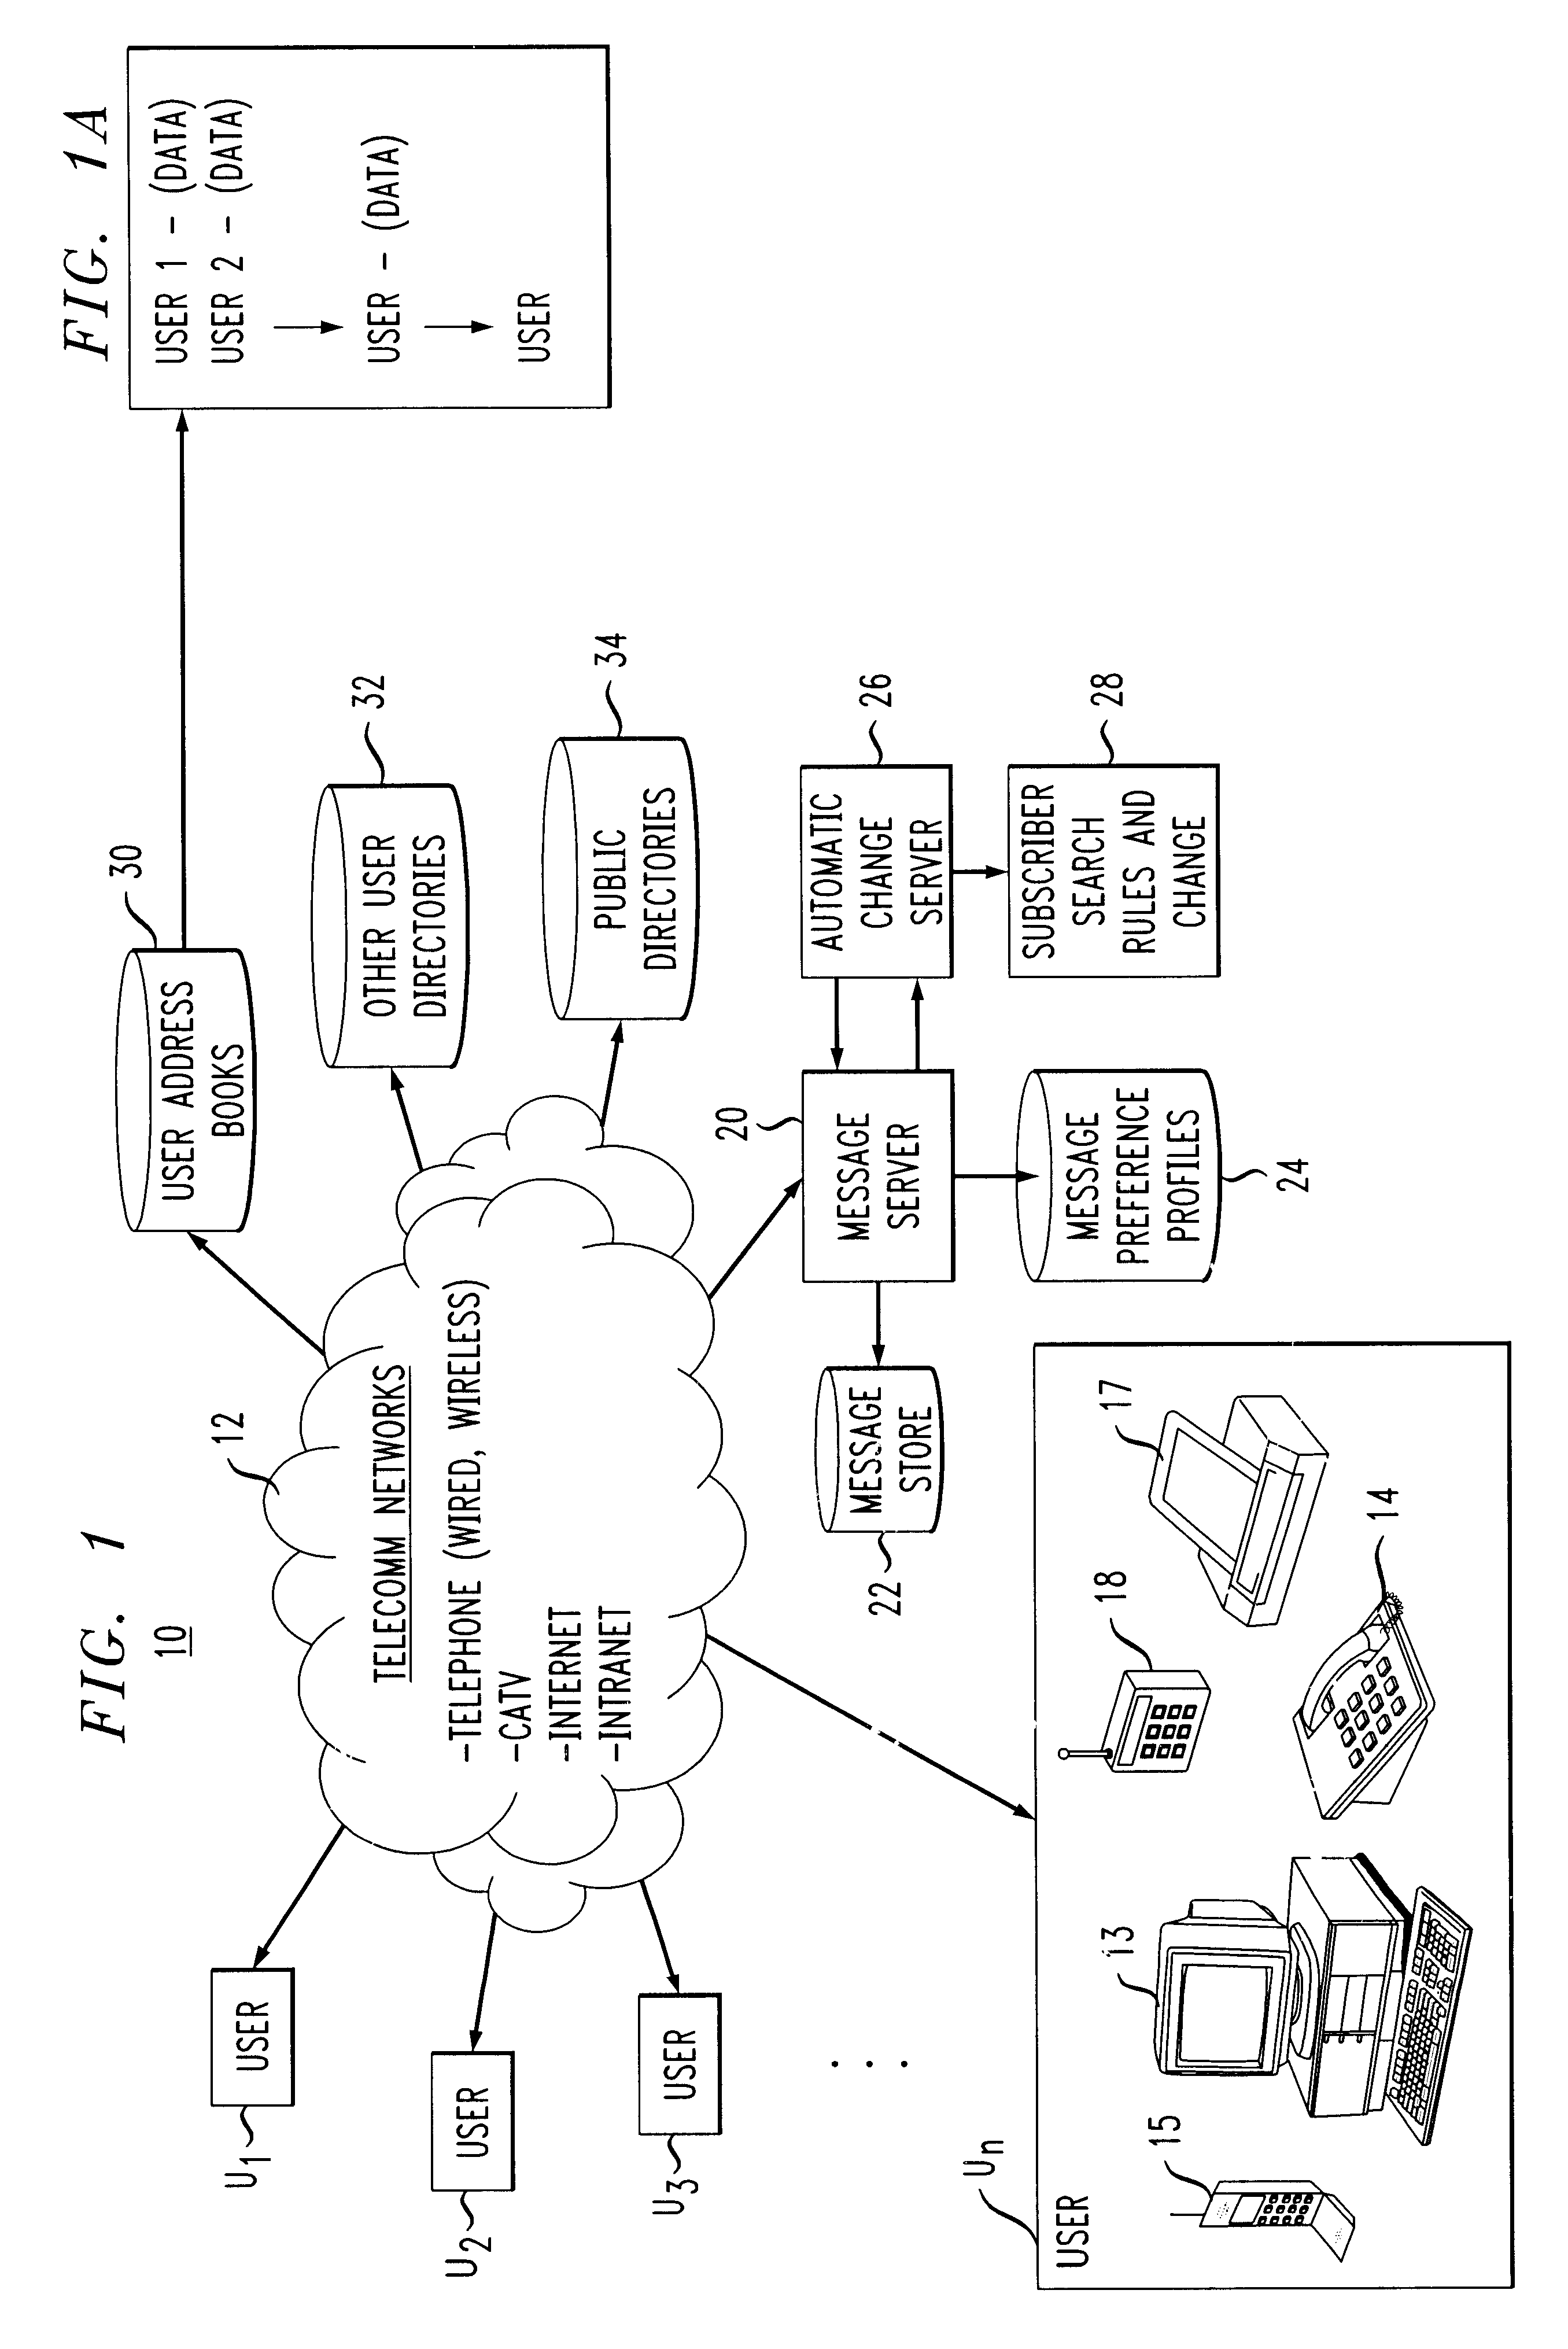 System, apparatus and method for automatic address updating of outgoing and incoming user messages in a communications network